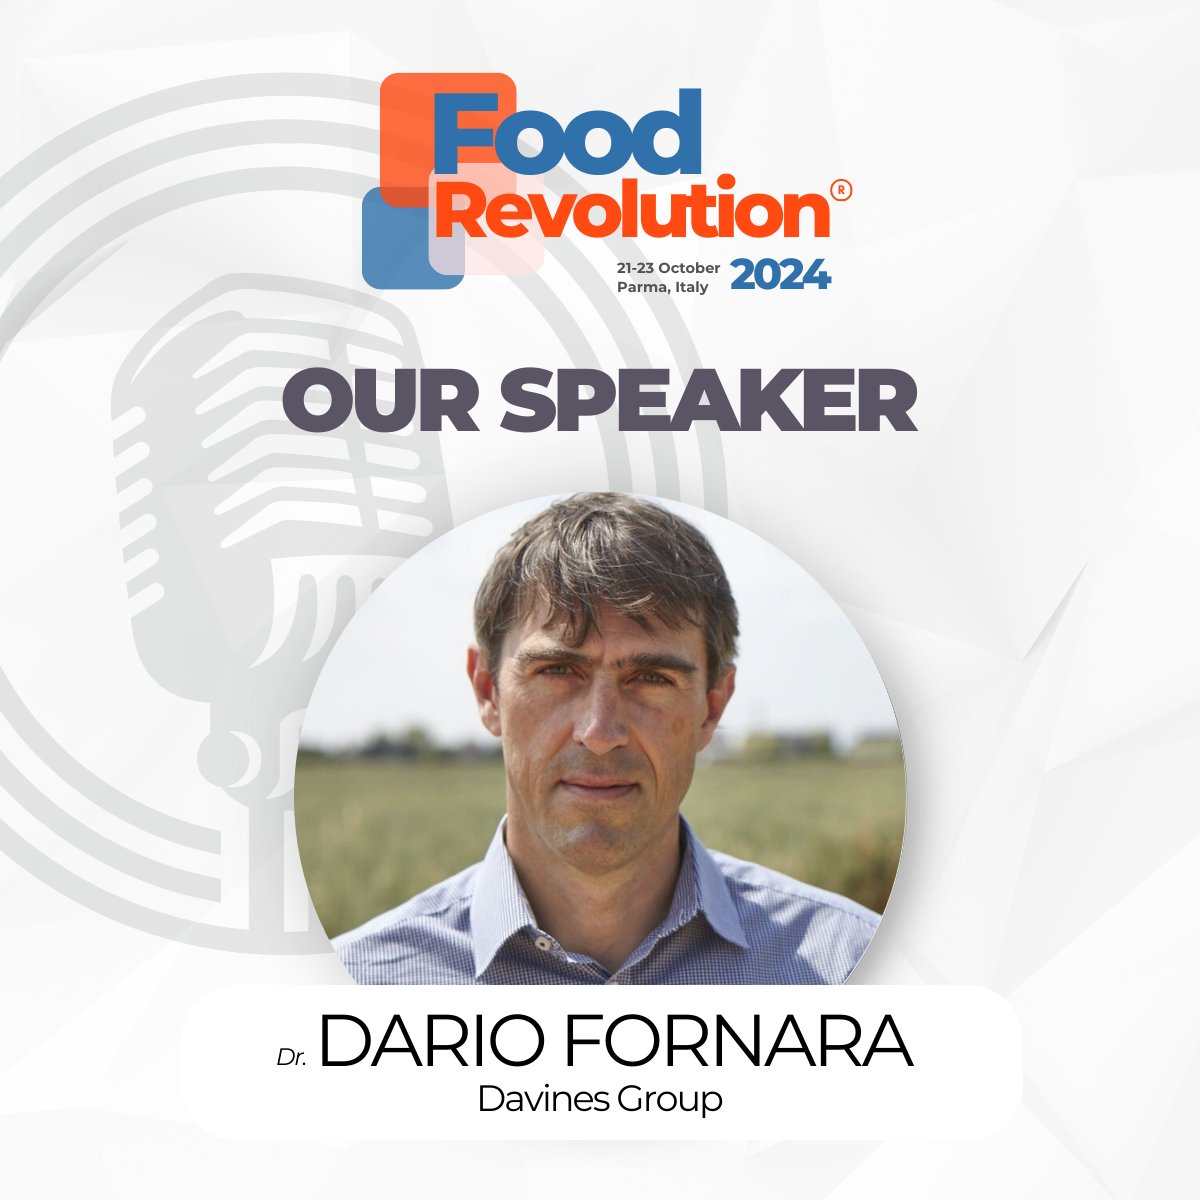 We are delighted to introduce Dr. Dario Fornara as a speaker at #FoodRevolution2024.

We are confident that his talk will inspire and empower attendees to embrace regenerative practices and create a more sustainable food future.

Join us in Parma (IT) from October 21st to 23rd.